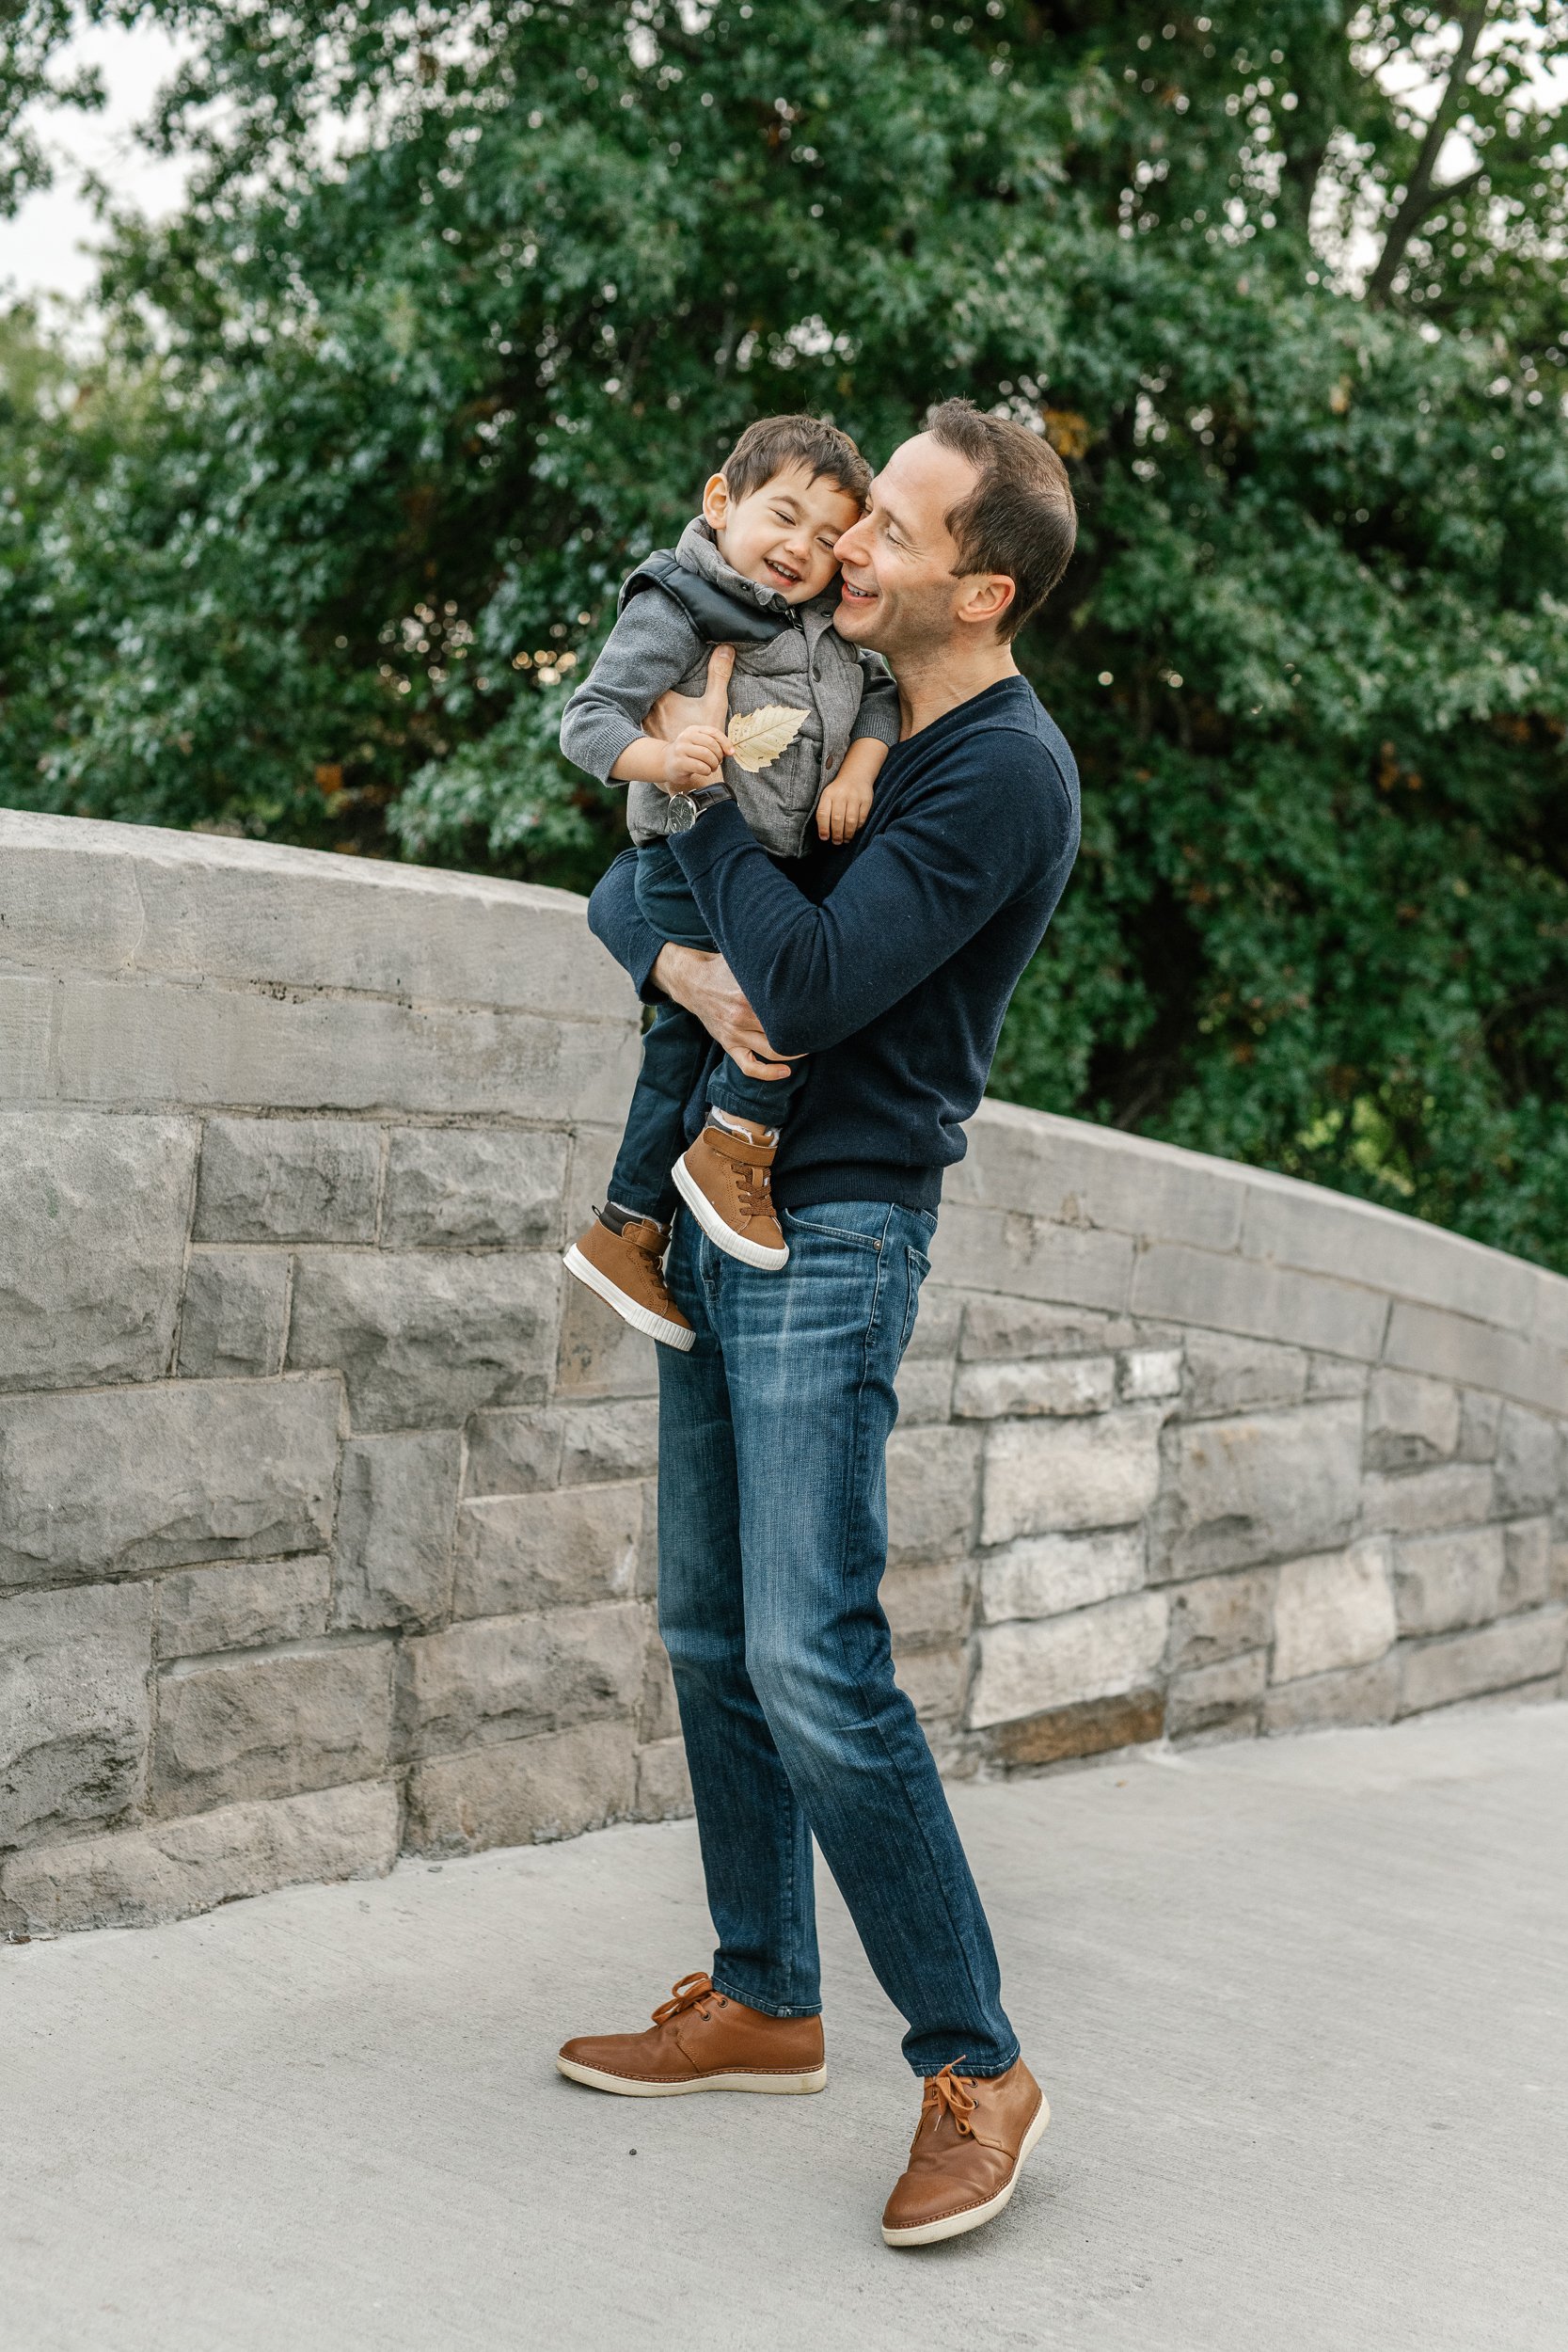  A father holds his little boy in his arms and tickles him in Verona Park on a stone bridge captured by Nicole Hawkins a family photographer in New Jersey. brown dress shoes for men brown boots boys father and son portrait #nicolehawkinsphotography #